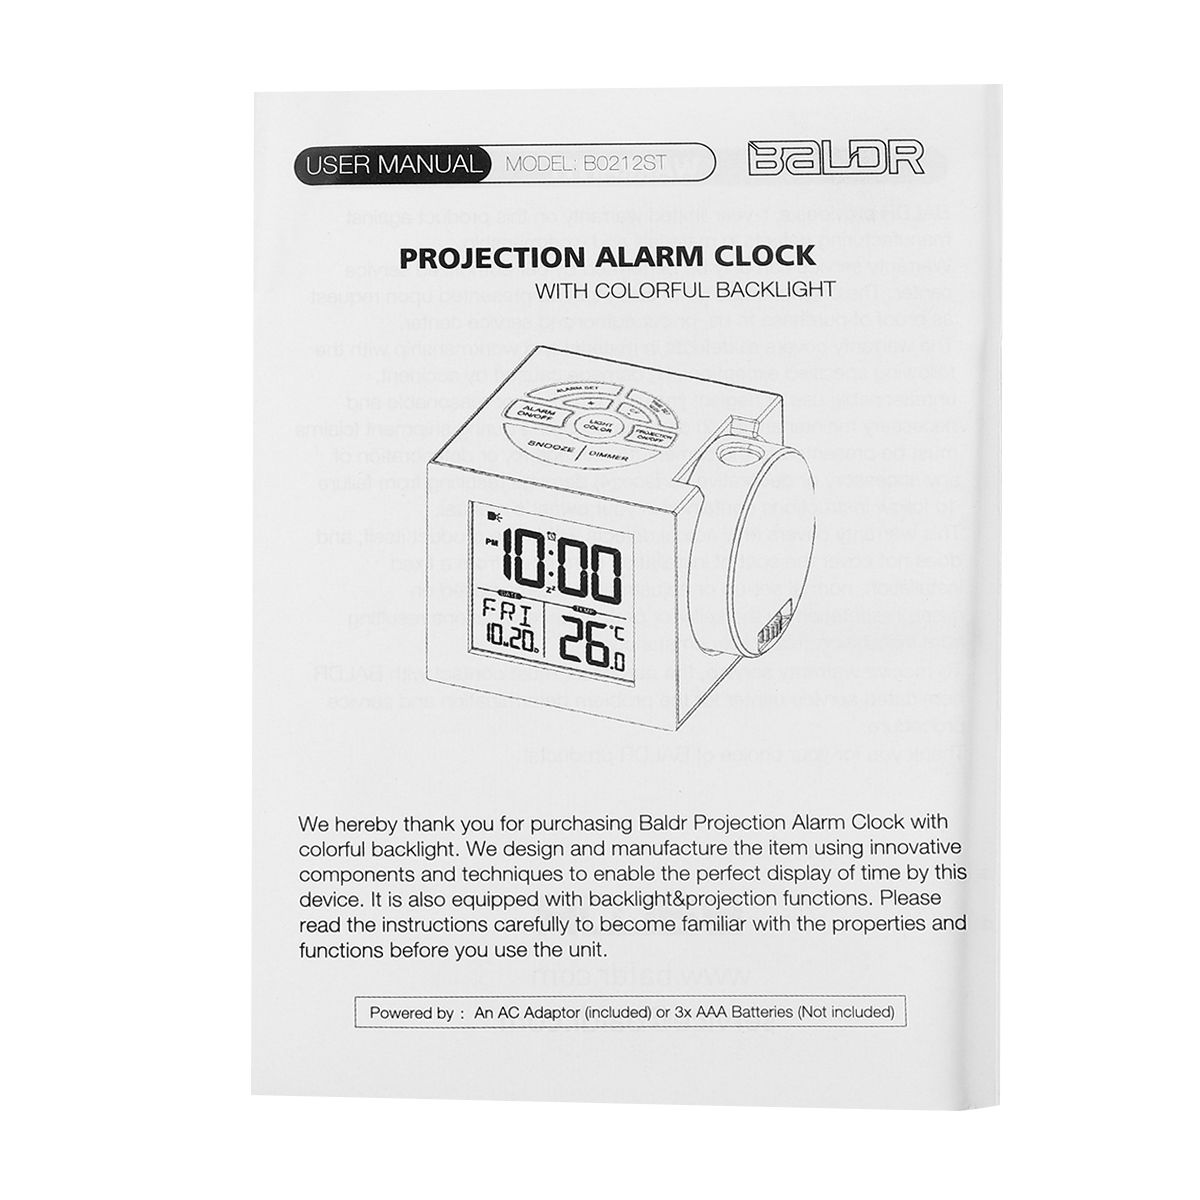 Digital--LED-Projection-Alarm-Clock-Thermometer-Snooze-Weather-Function-7-Color-1640238